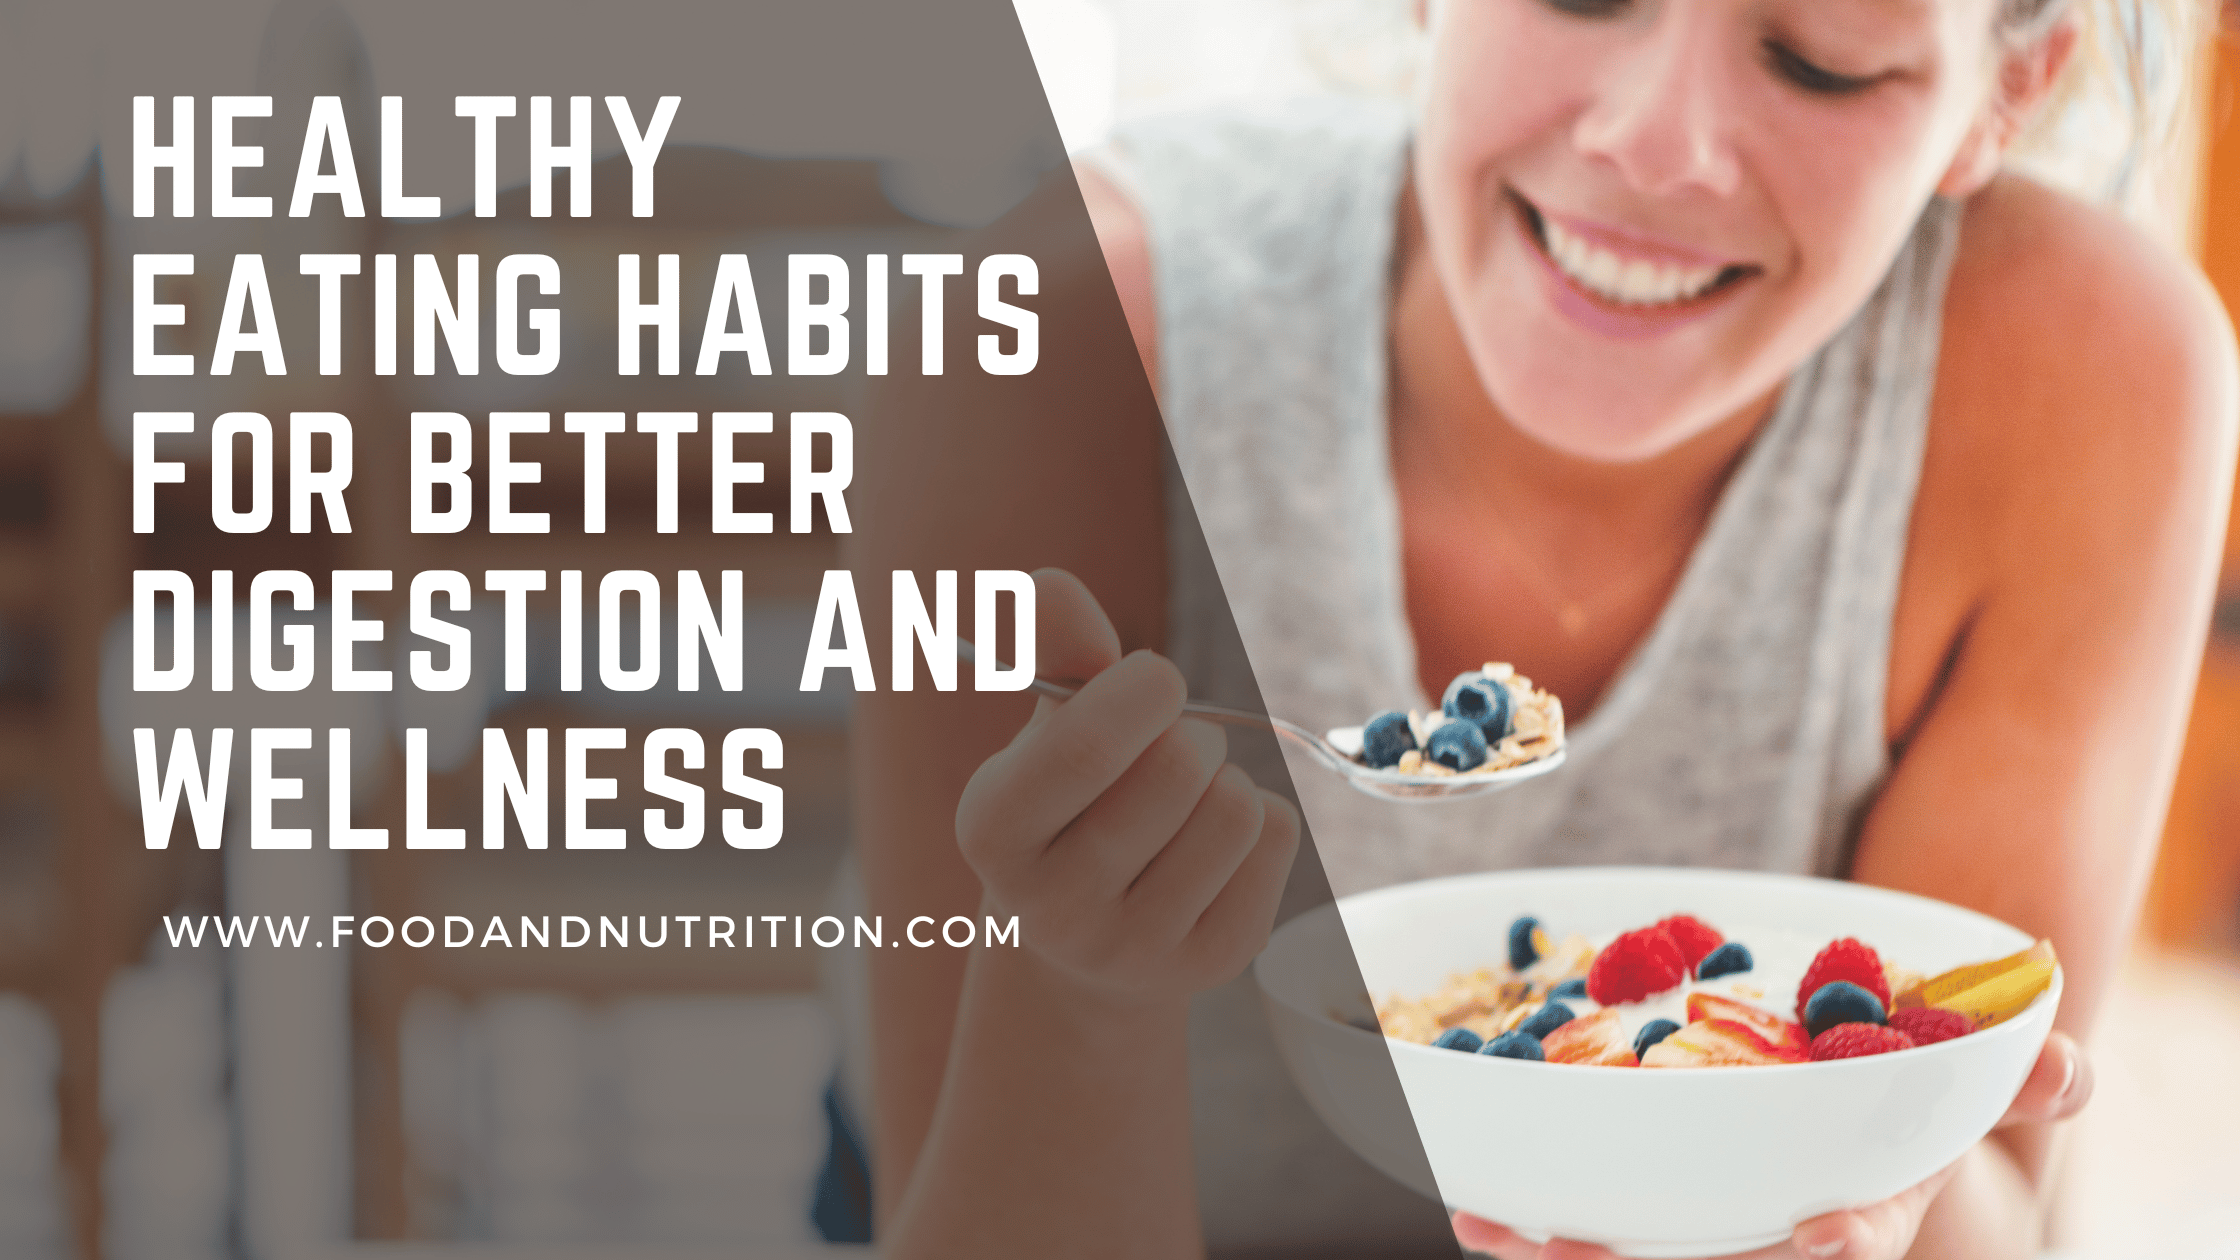 Healthy Eating Habits for Better Digestion and Wellness